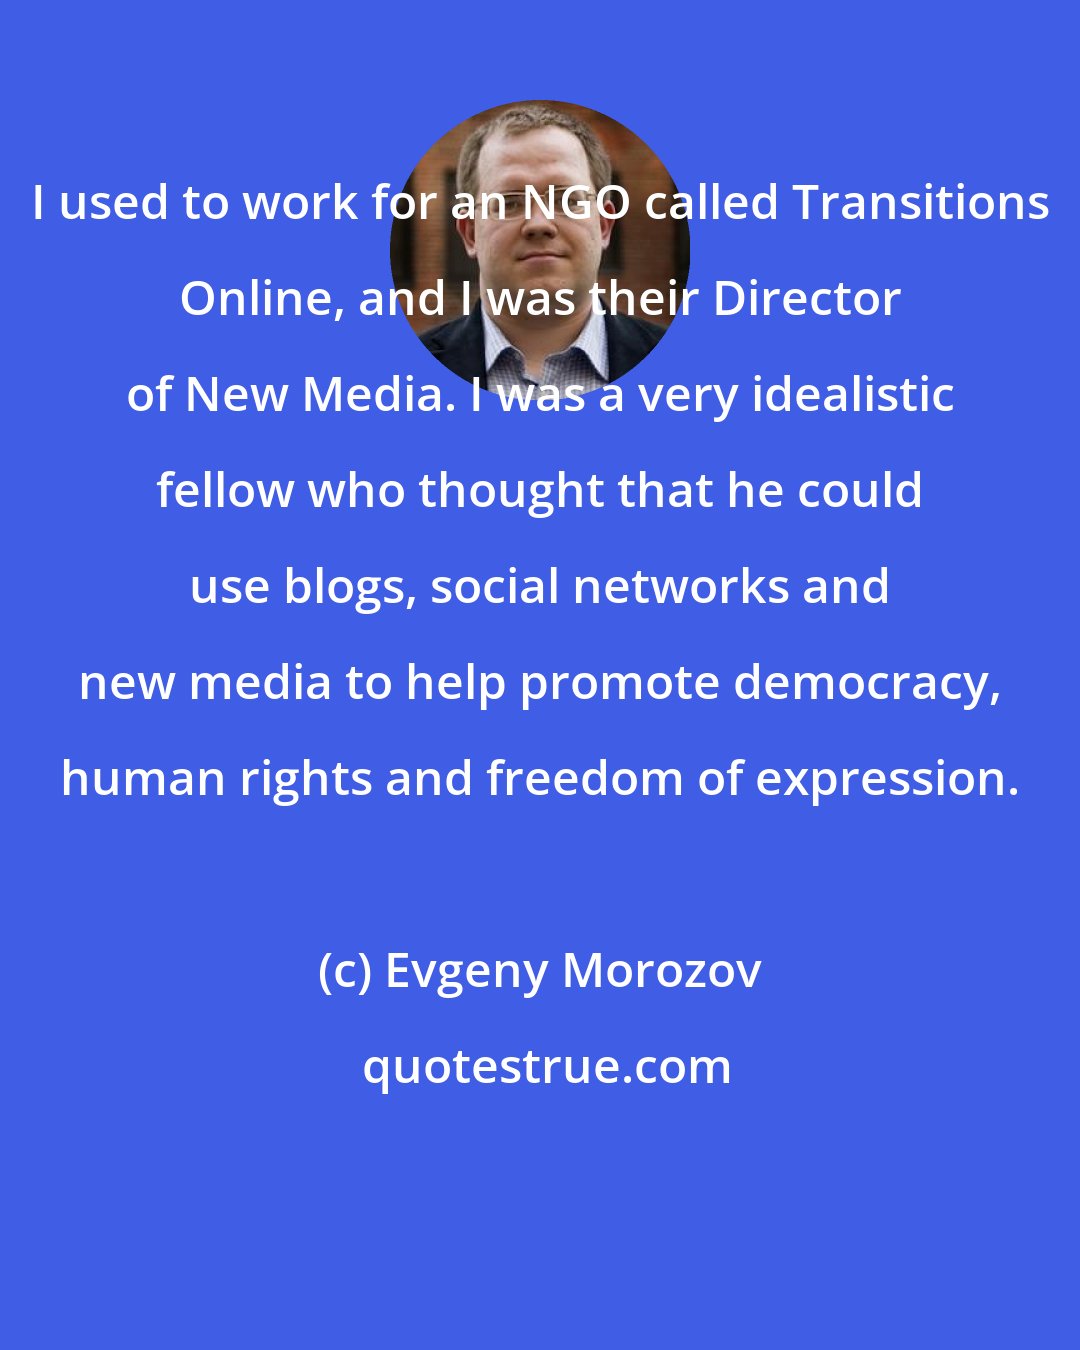 Evgeny Morozov: I used to work for an NGO called Transitions Online, and I was their Director of New Media. I was a very idealistic fellow who thought that he could use blogs, social networks and new media to help promote democracy, human rights and freedom of expression.